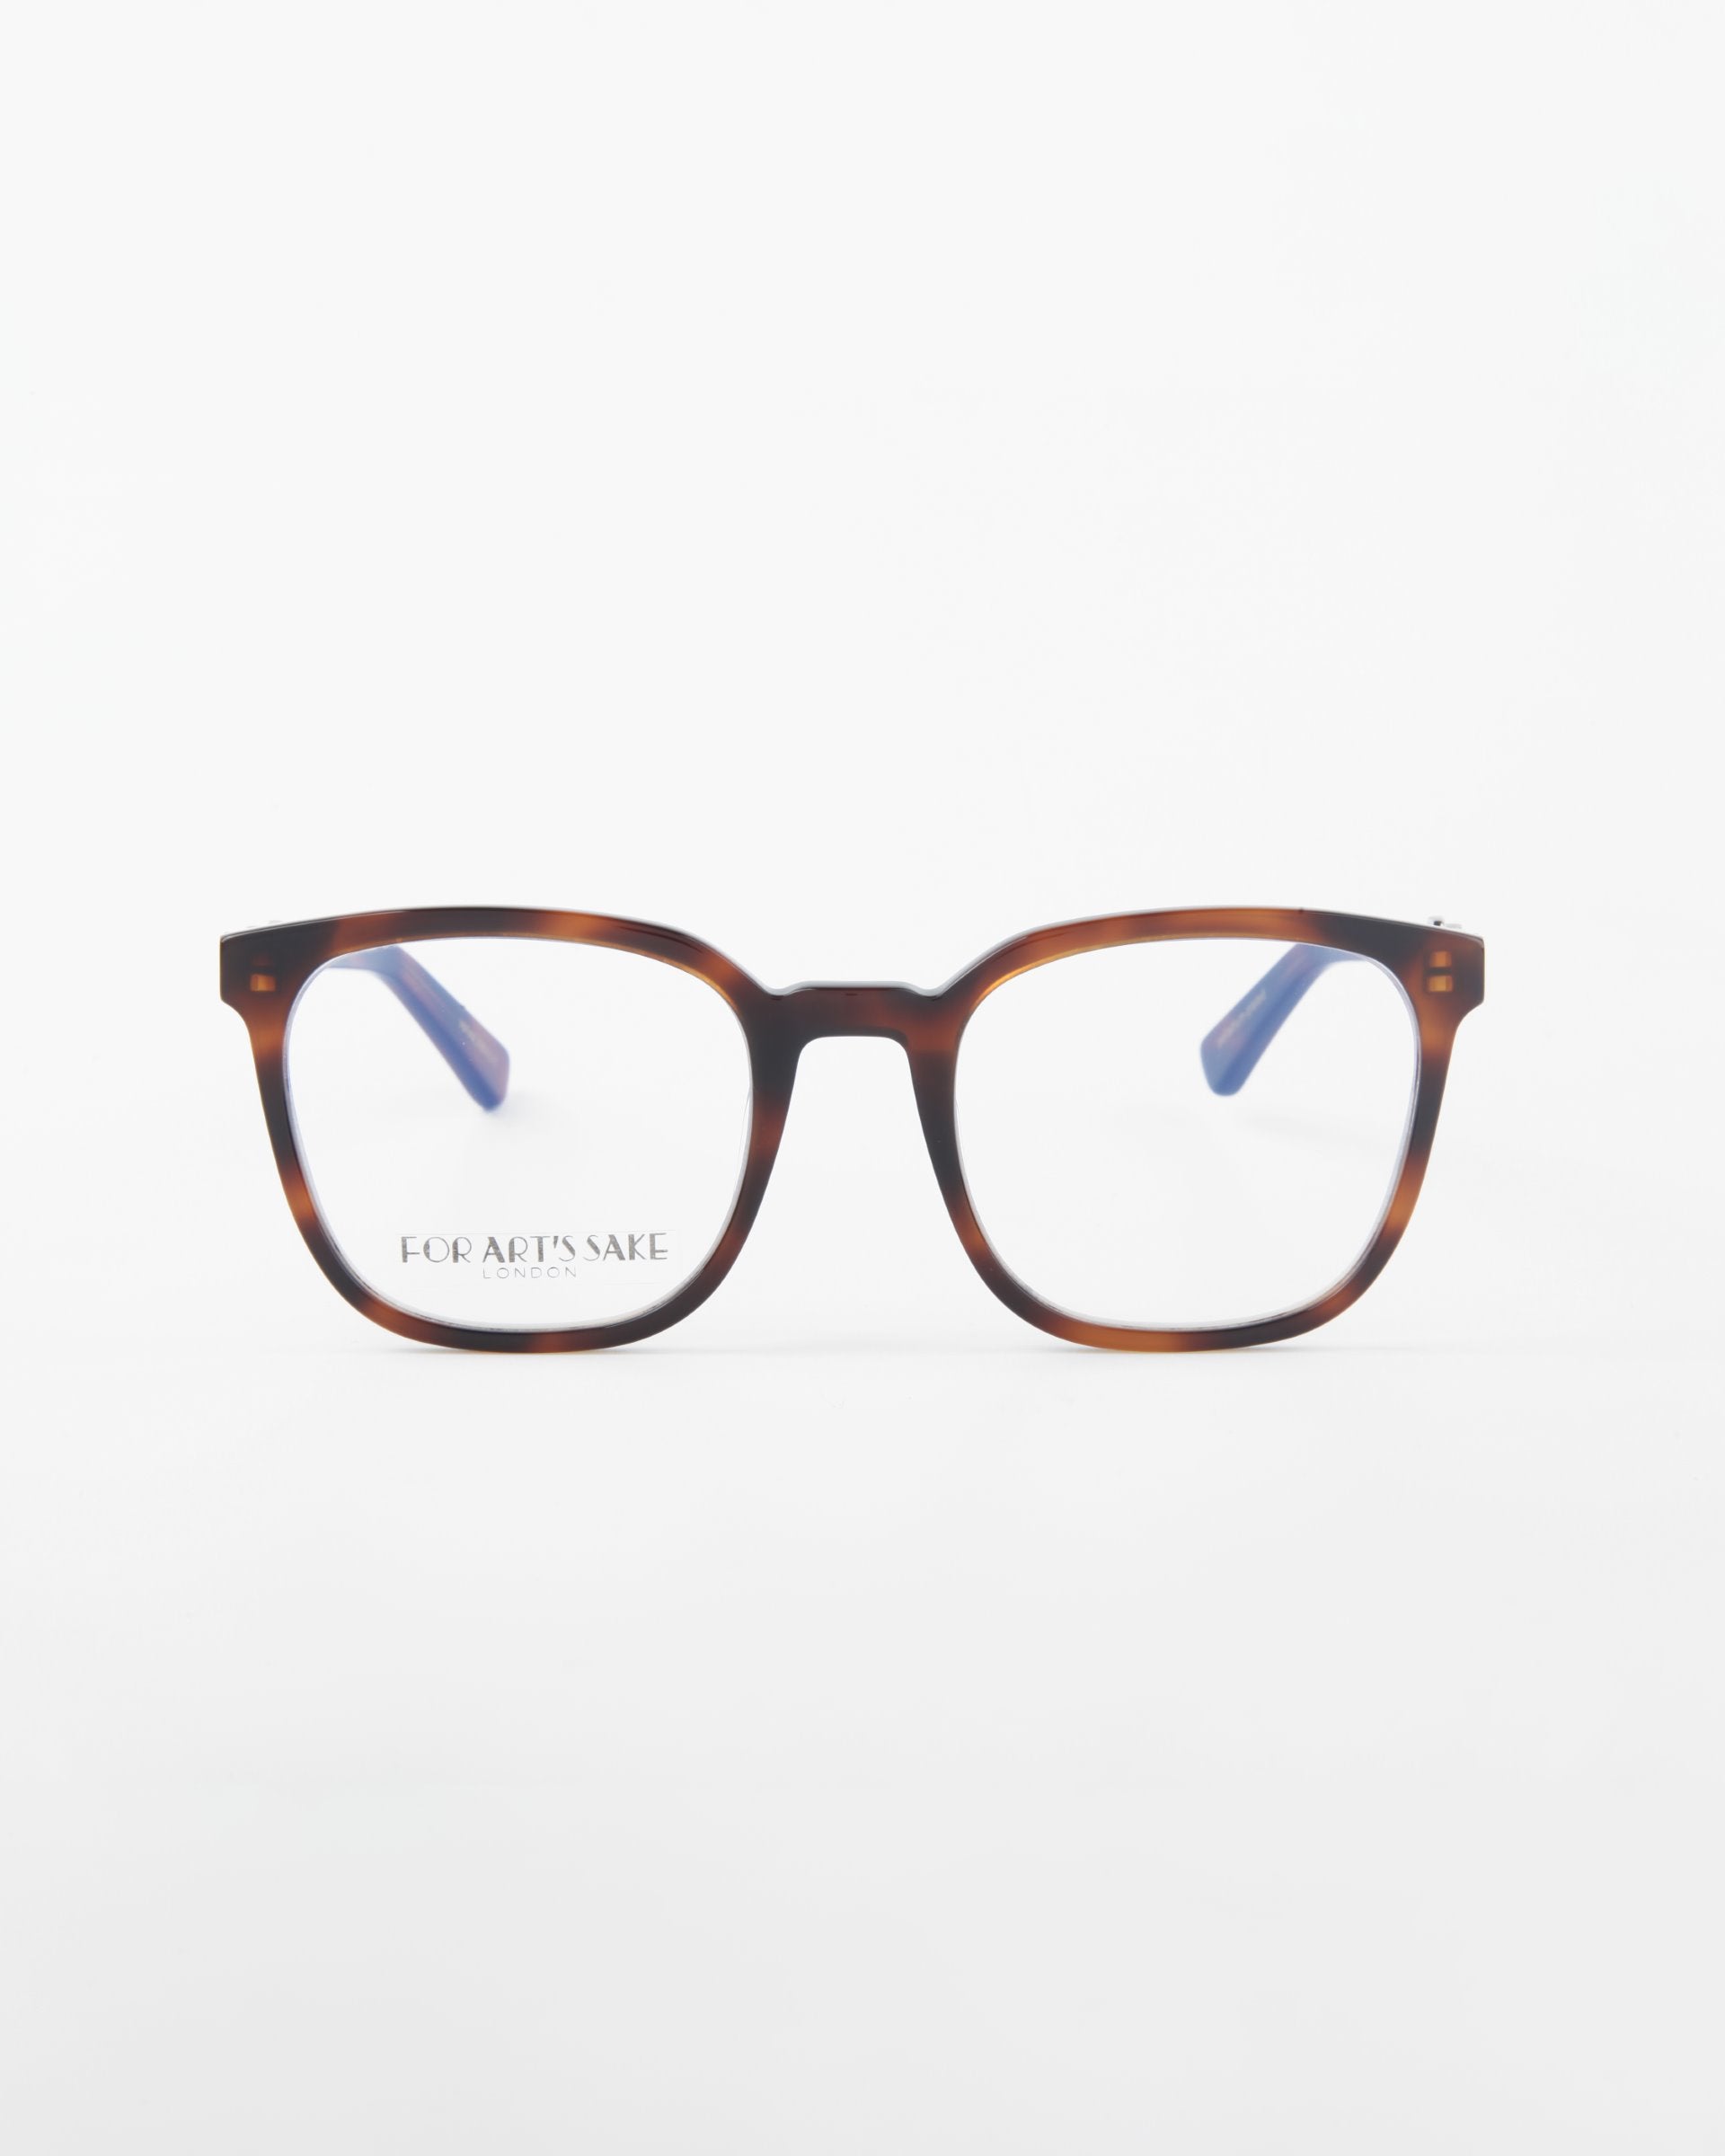 A pair of brown tortoiseshell rectangular eyeglasses with blue-tinted arms is displayed against a plain white background. Made from plant-based acetate, the phrase "FOR ART'S SAKE" is visible on one of the lenses, highlighting their eco-friendly appeal. The model name for these eyeglasses is Molten by For Art's Sake®.